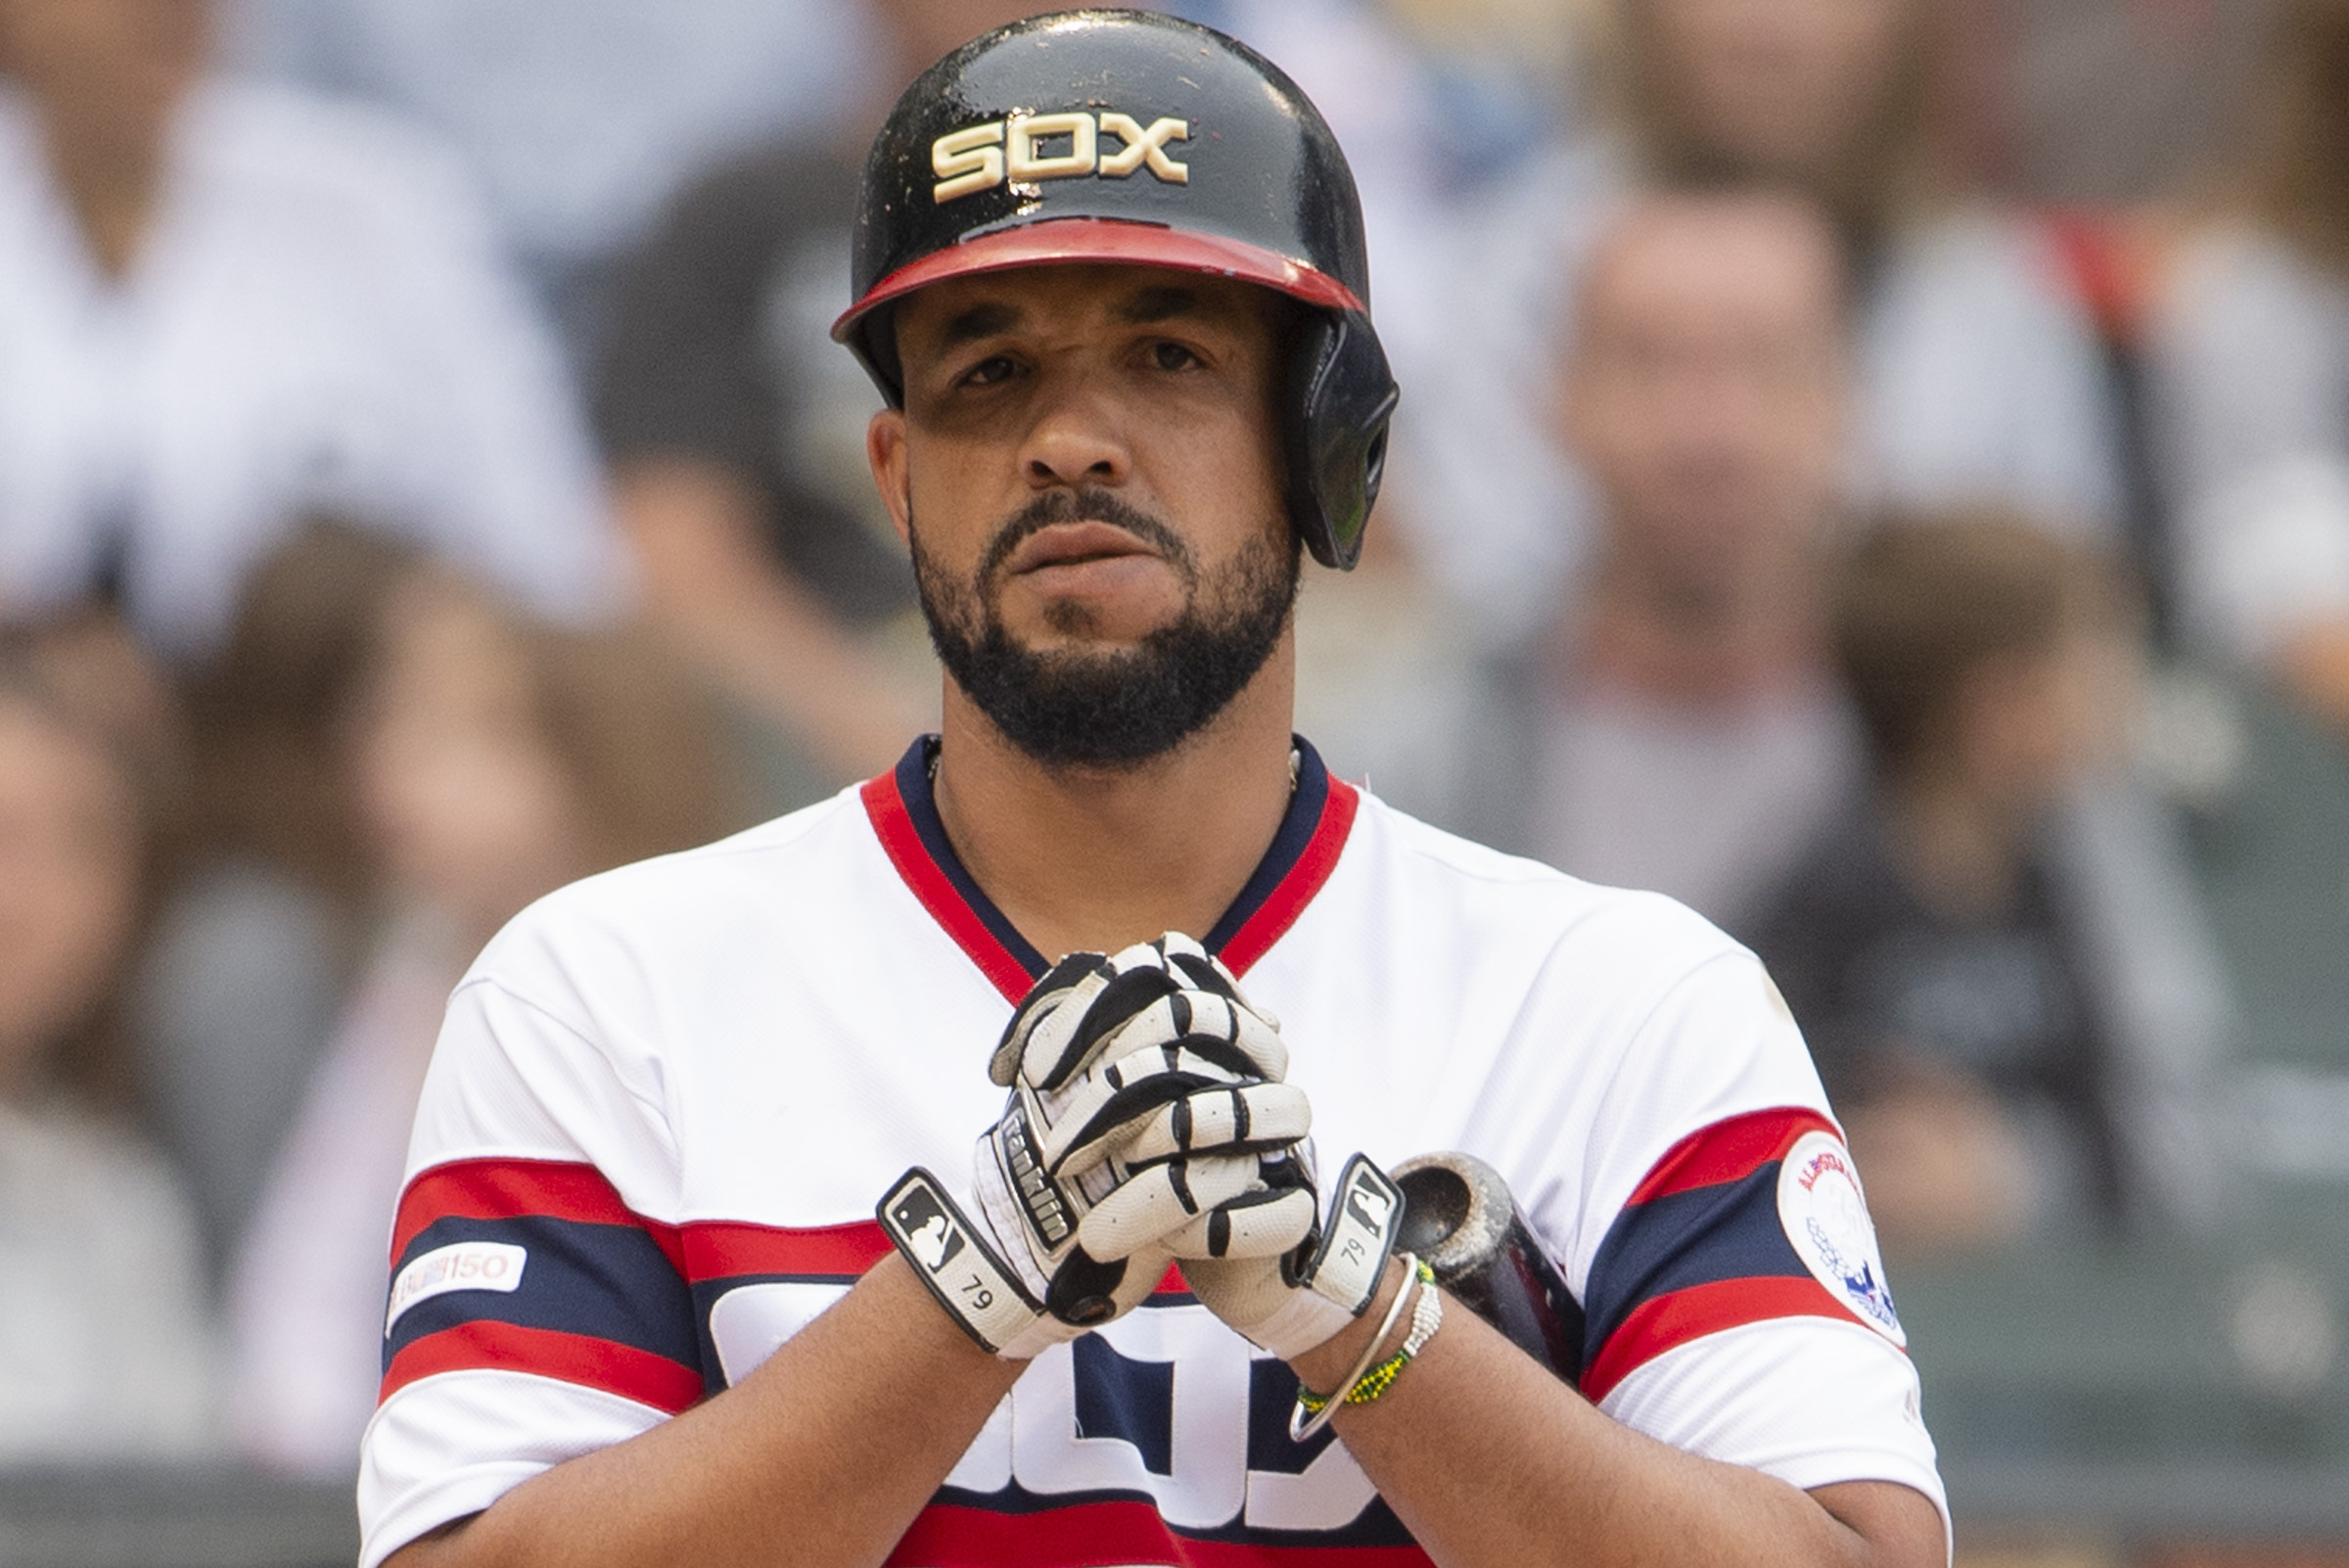 Jose Abreu gets a qualifying offer from the White Sox: Report